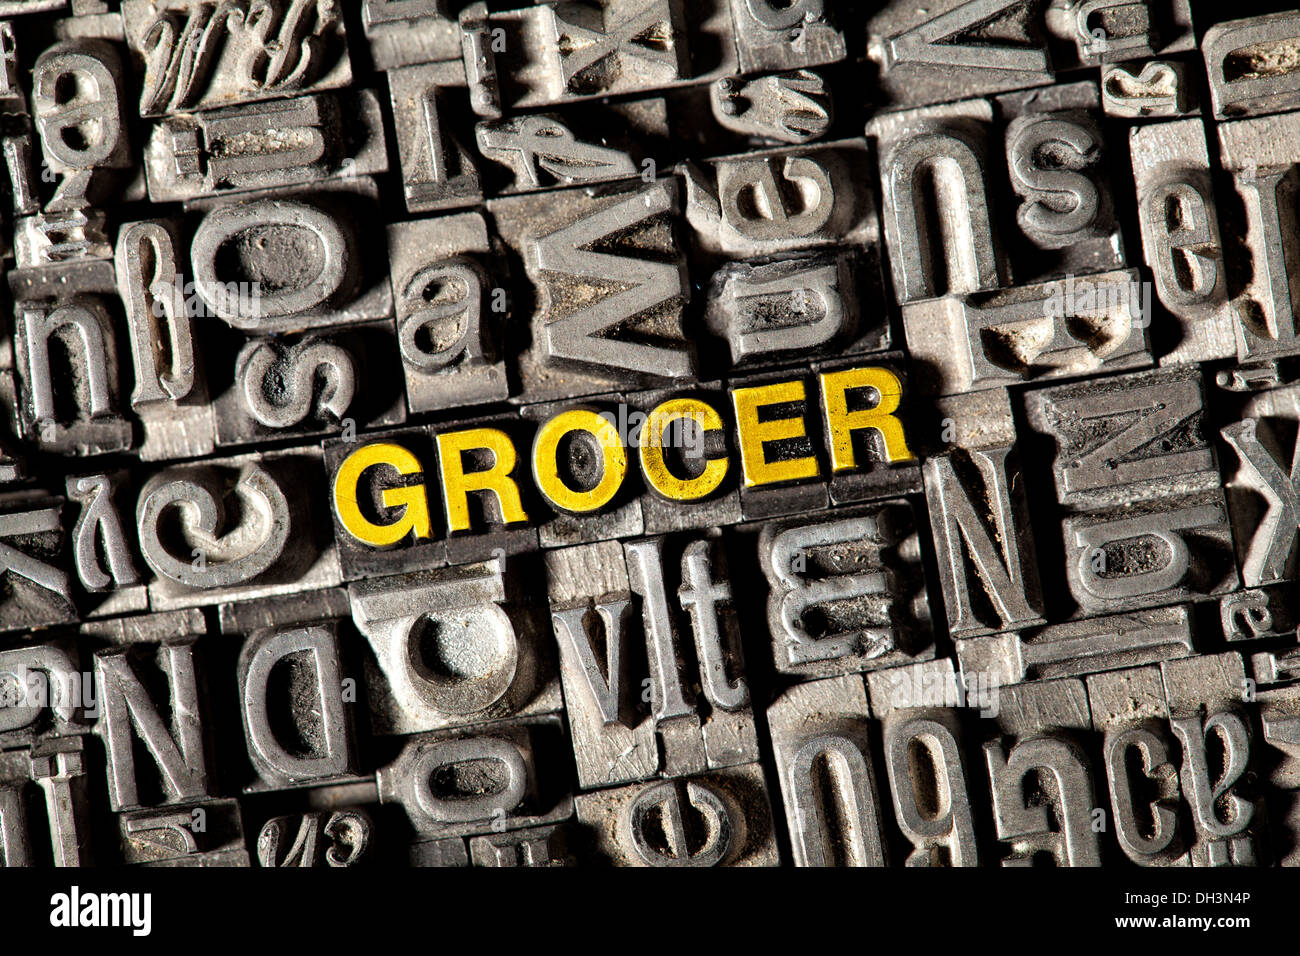 Old lead letters forming the word 'GROCER' Stock Photo